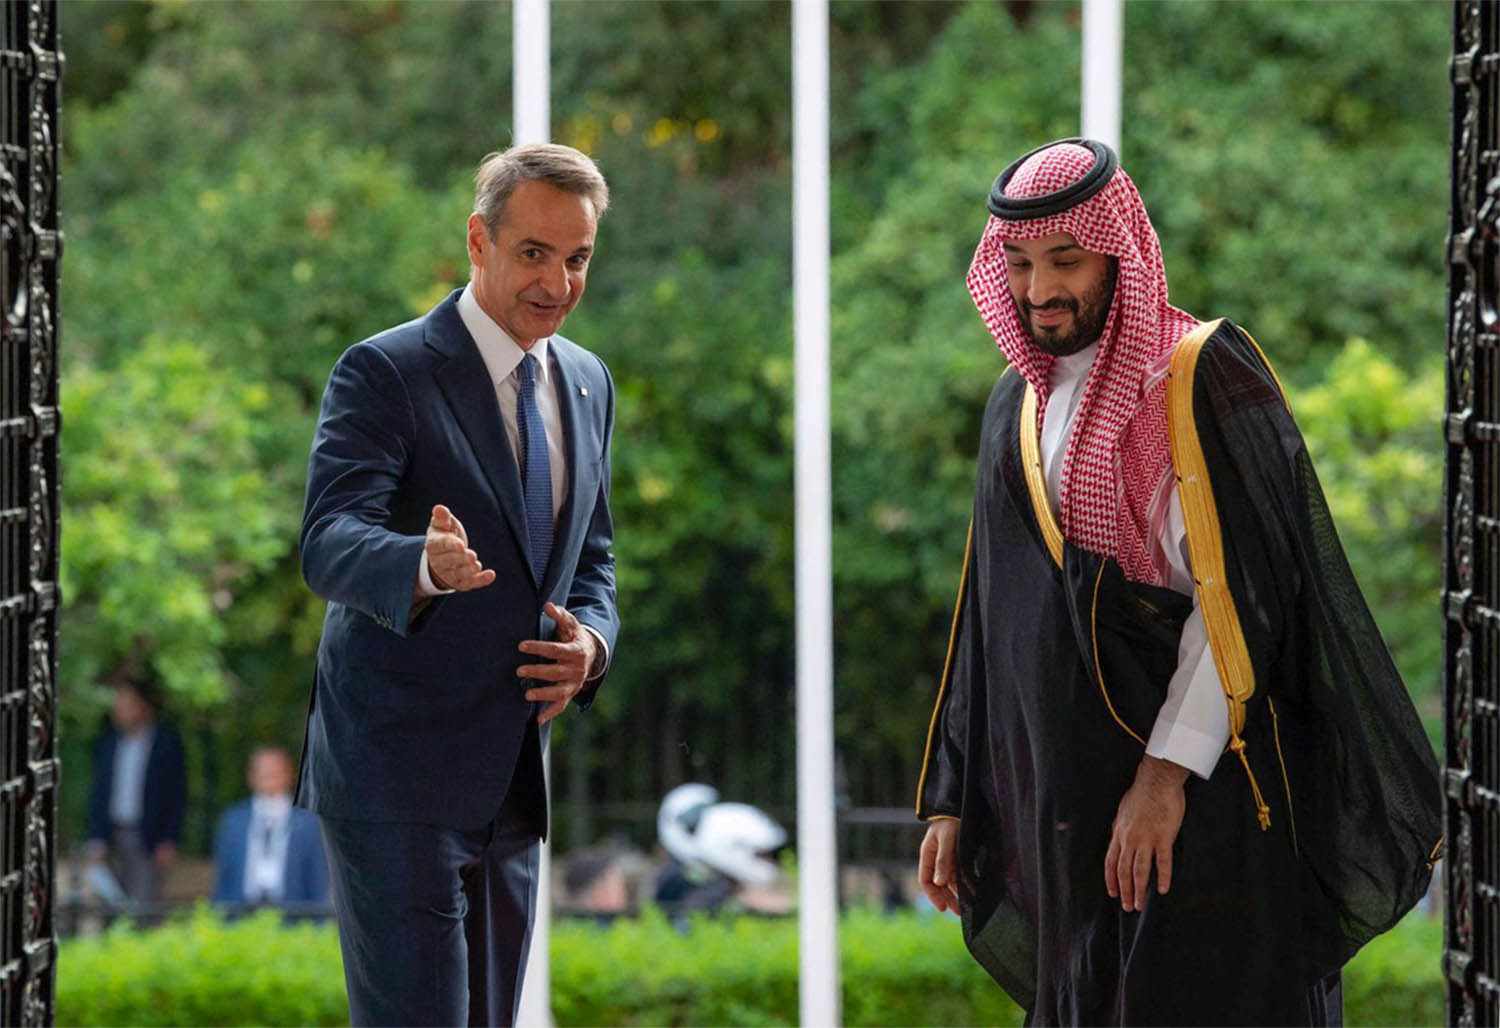 The deal was finalised during a visit by Prince Mohammed bin Salman to Athens